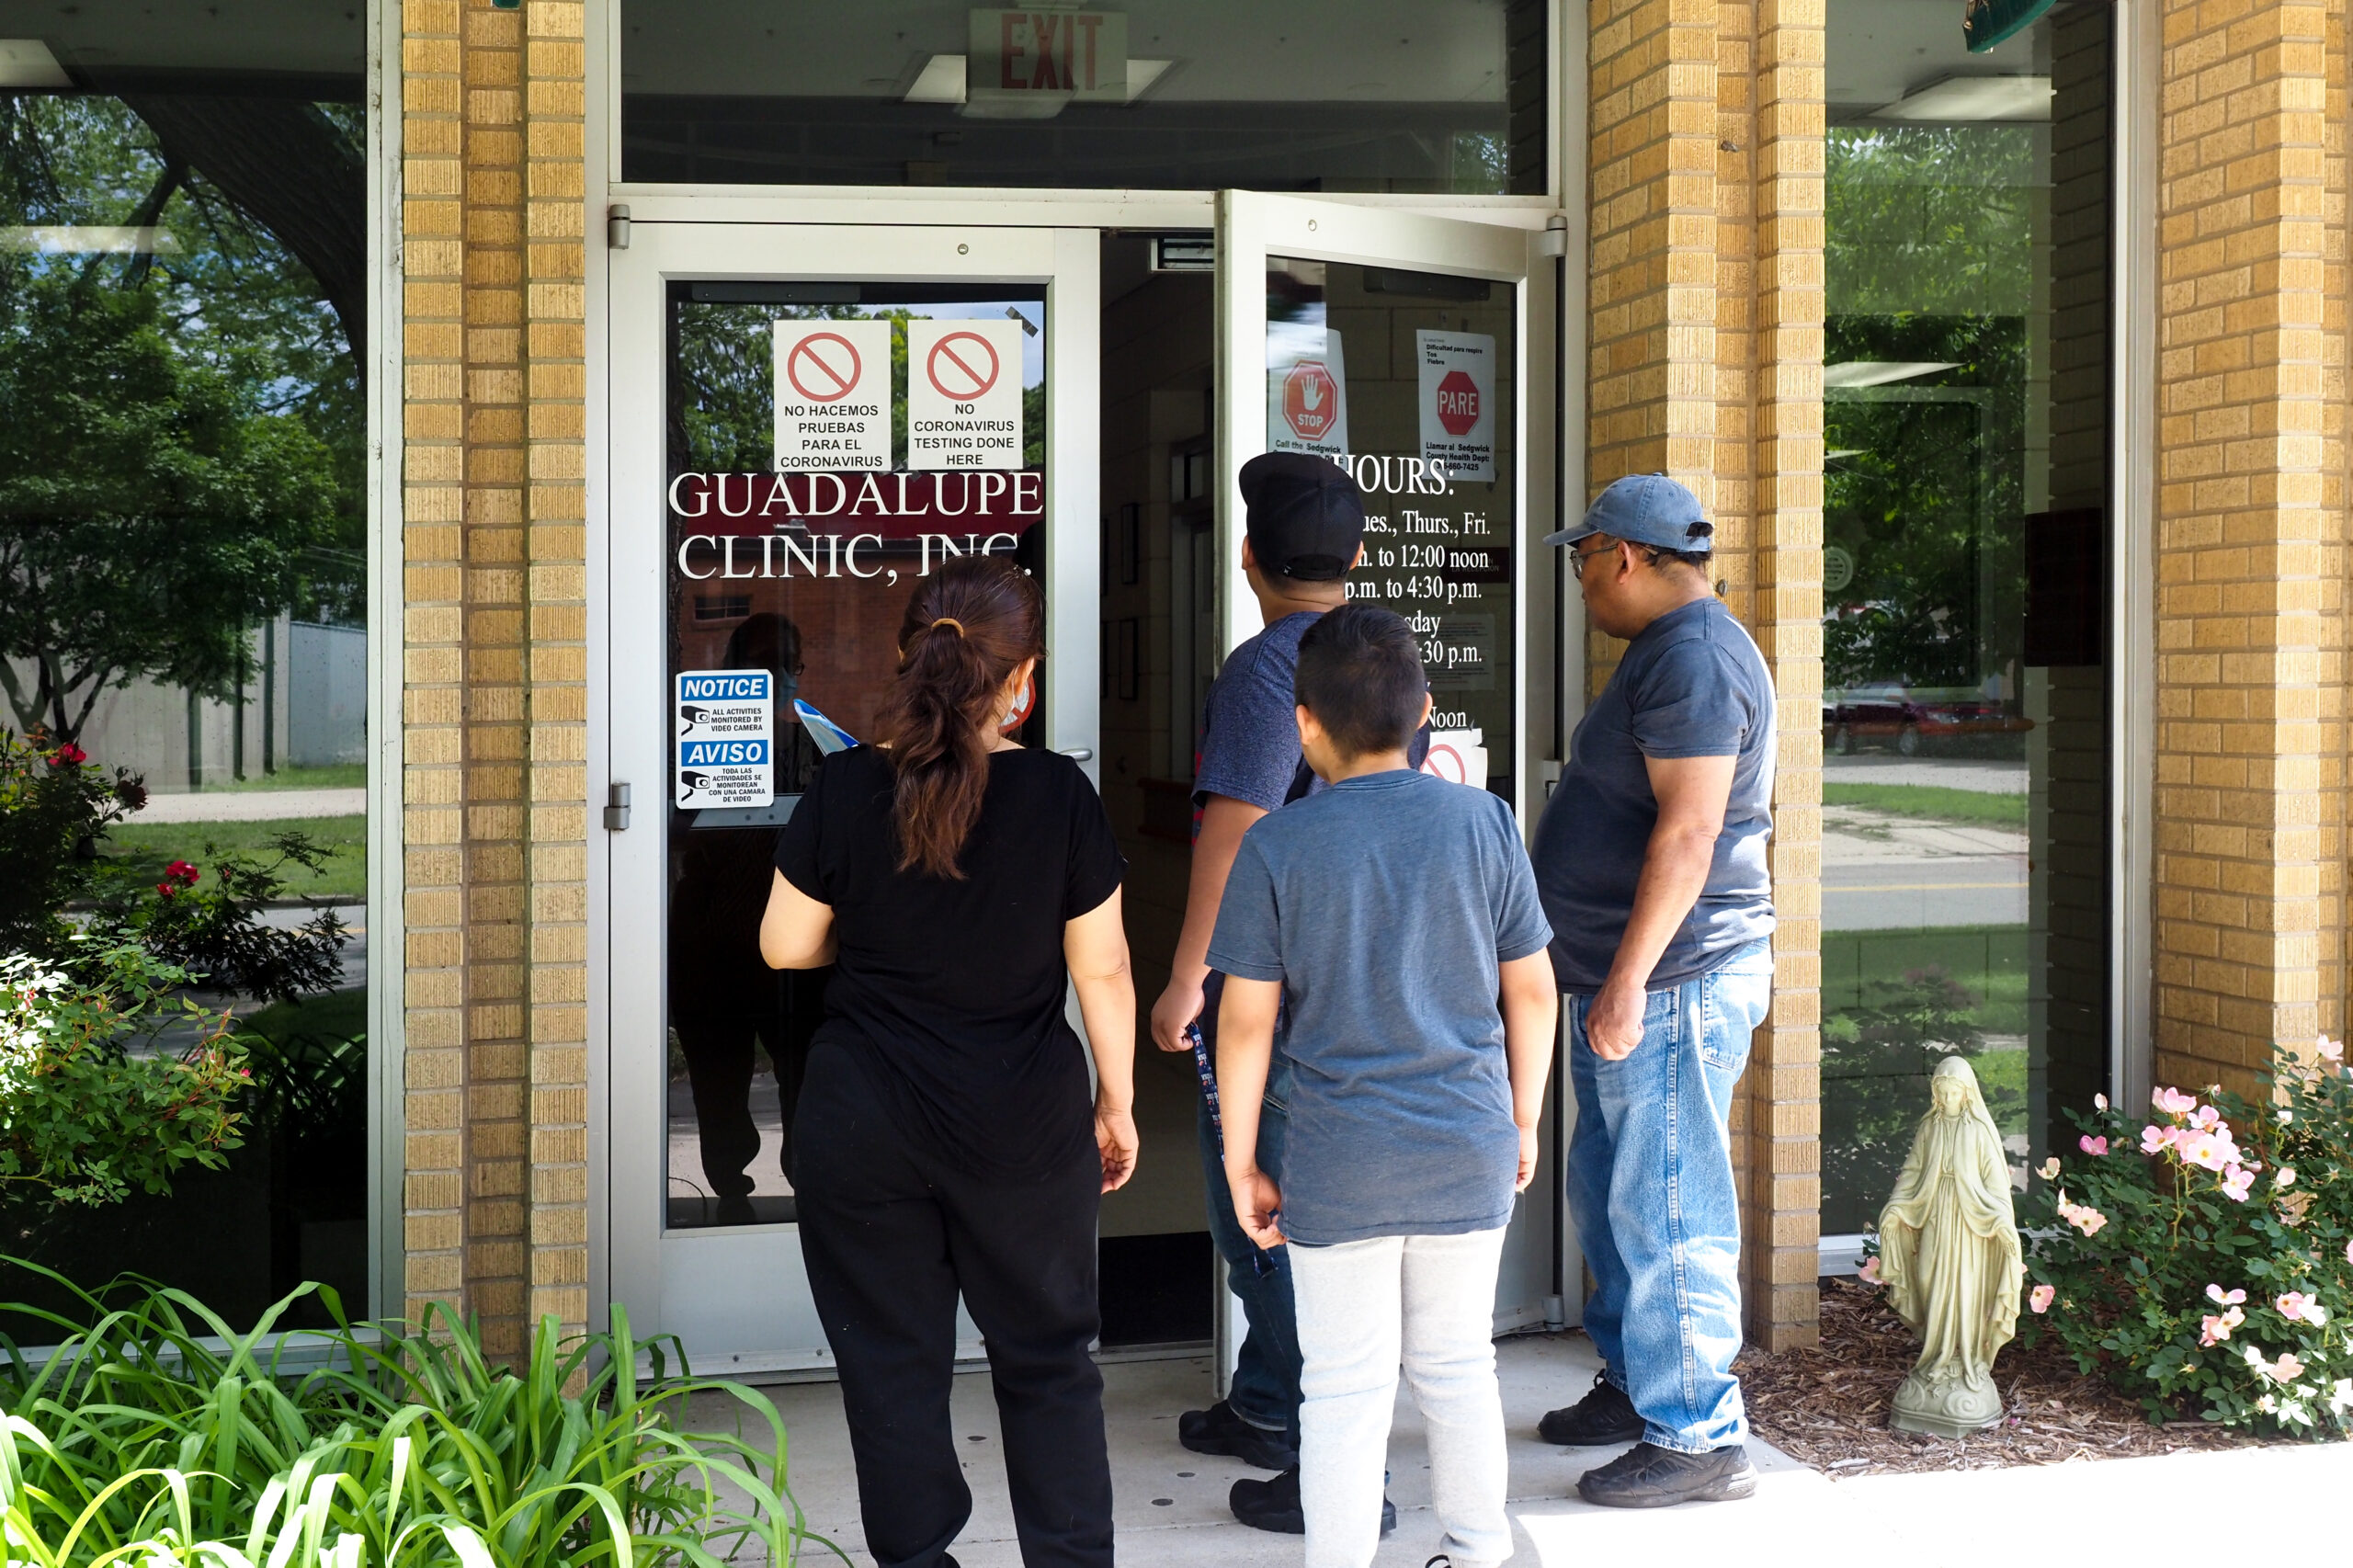 Patients enter the Guadalupe Clinic